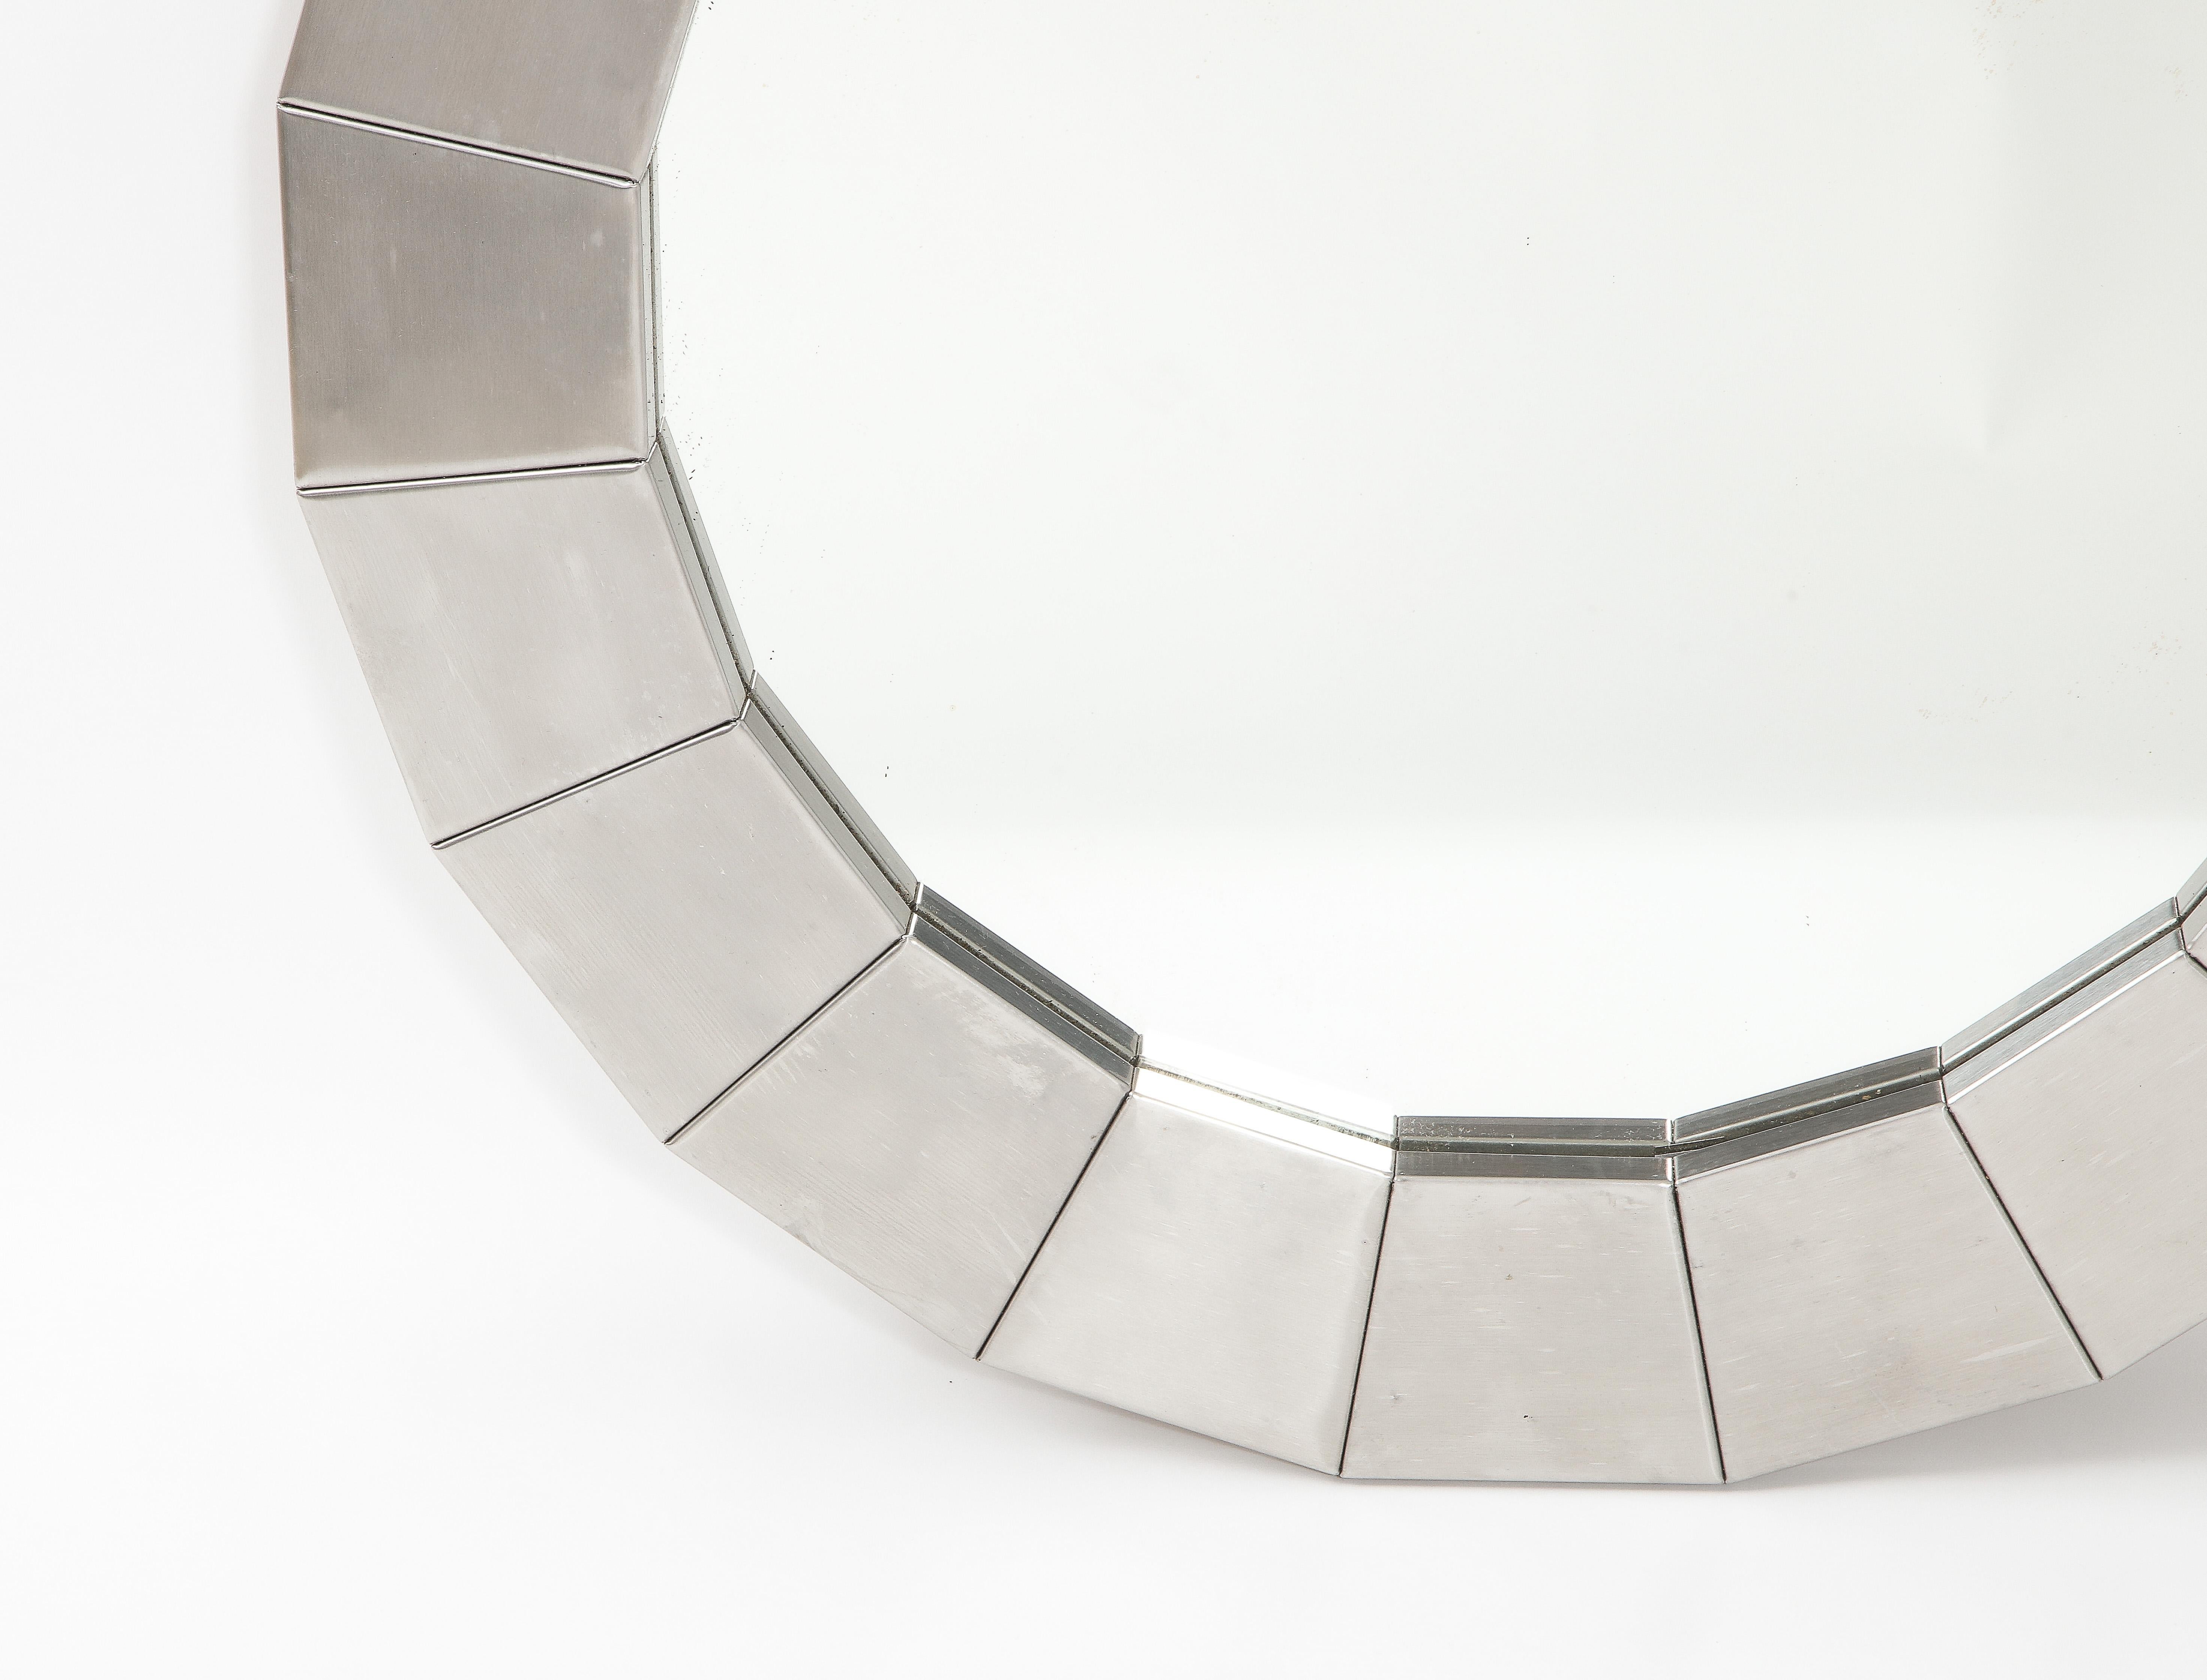 Stainless steel mirror with a faceted construction.